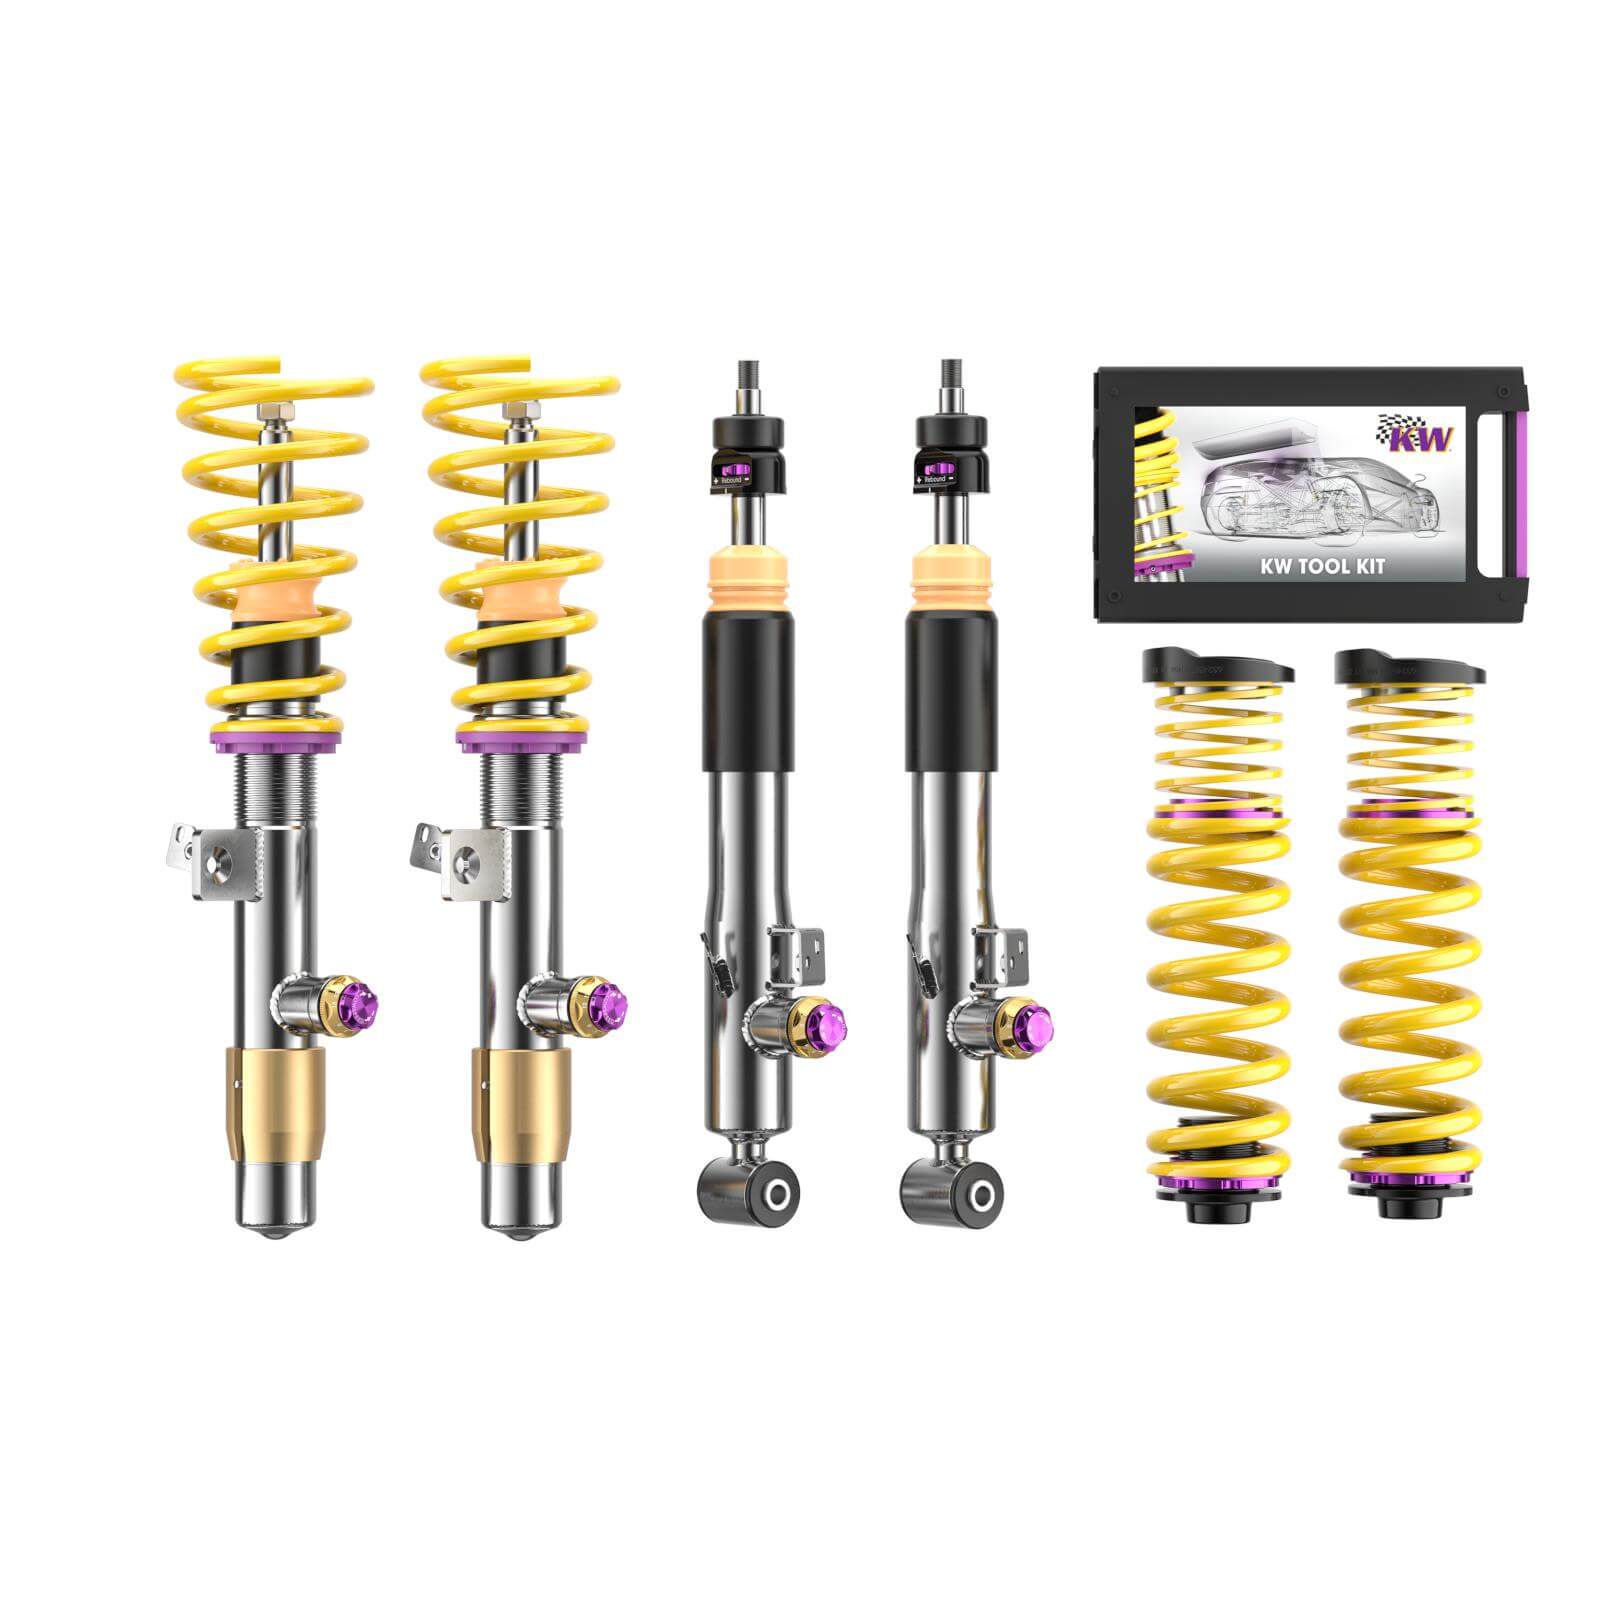 KW 3A766016 Coilover kit V4 for GENESIS Genesis G80 (RG) 2020+ Photo-0 